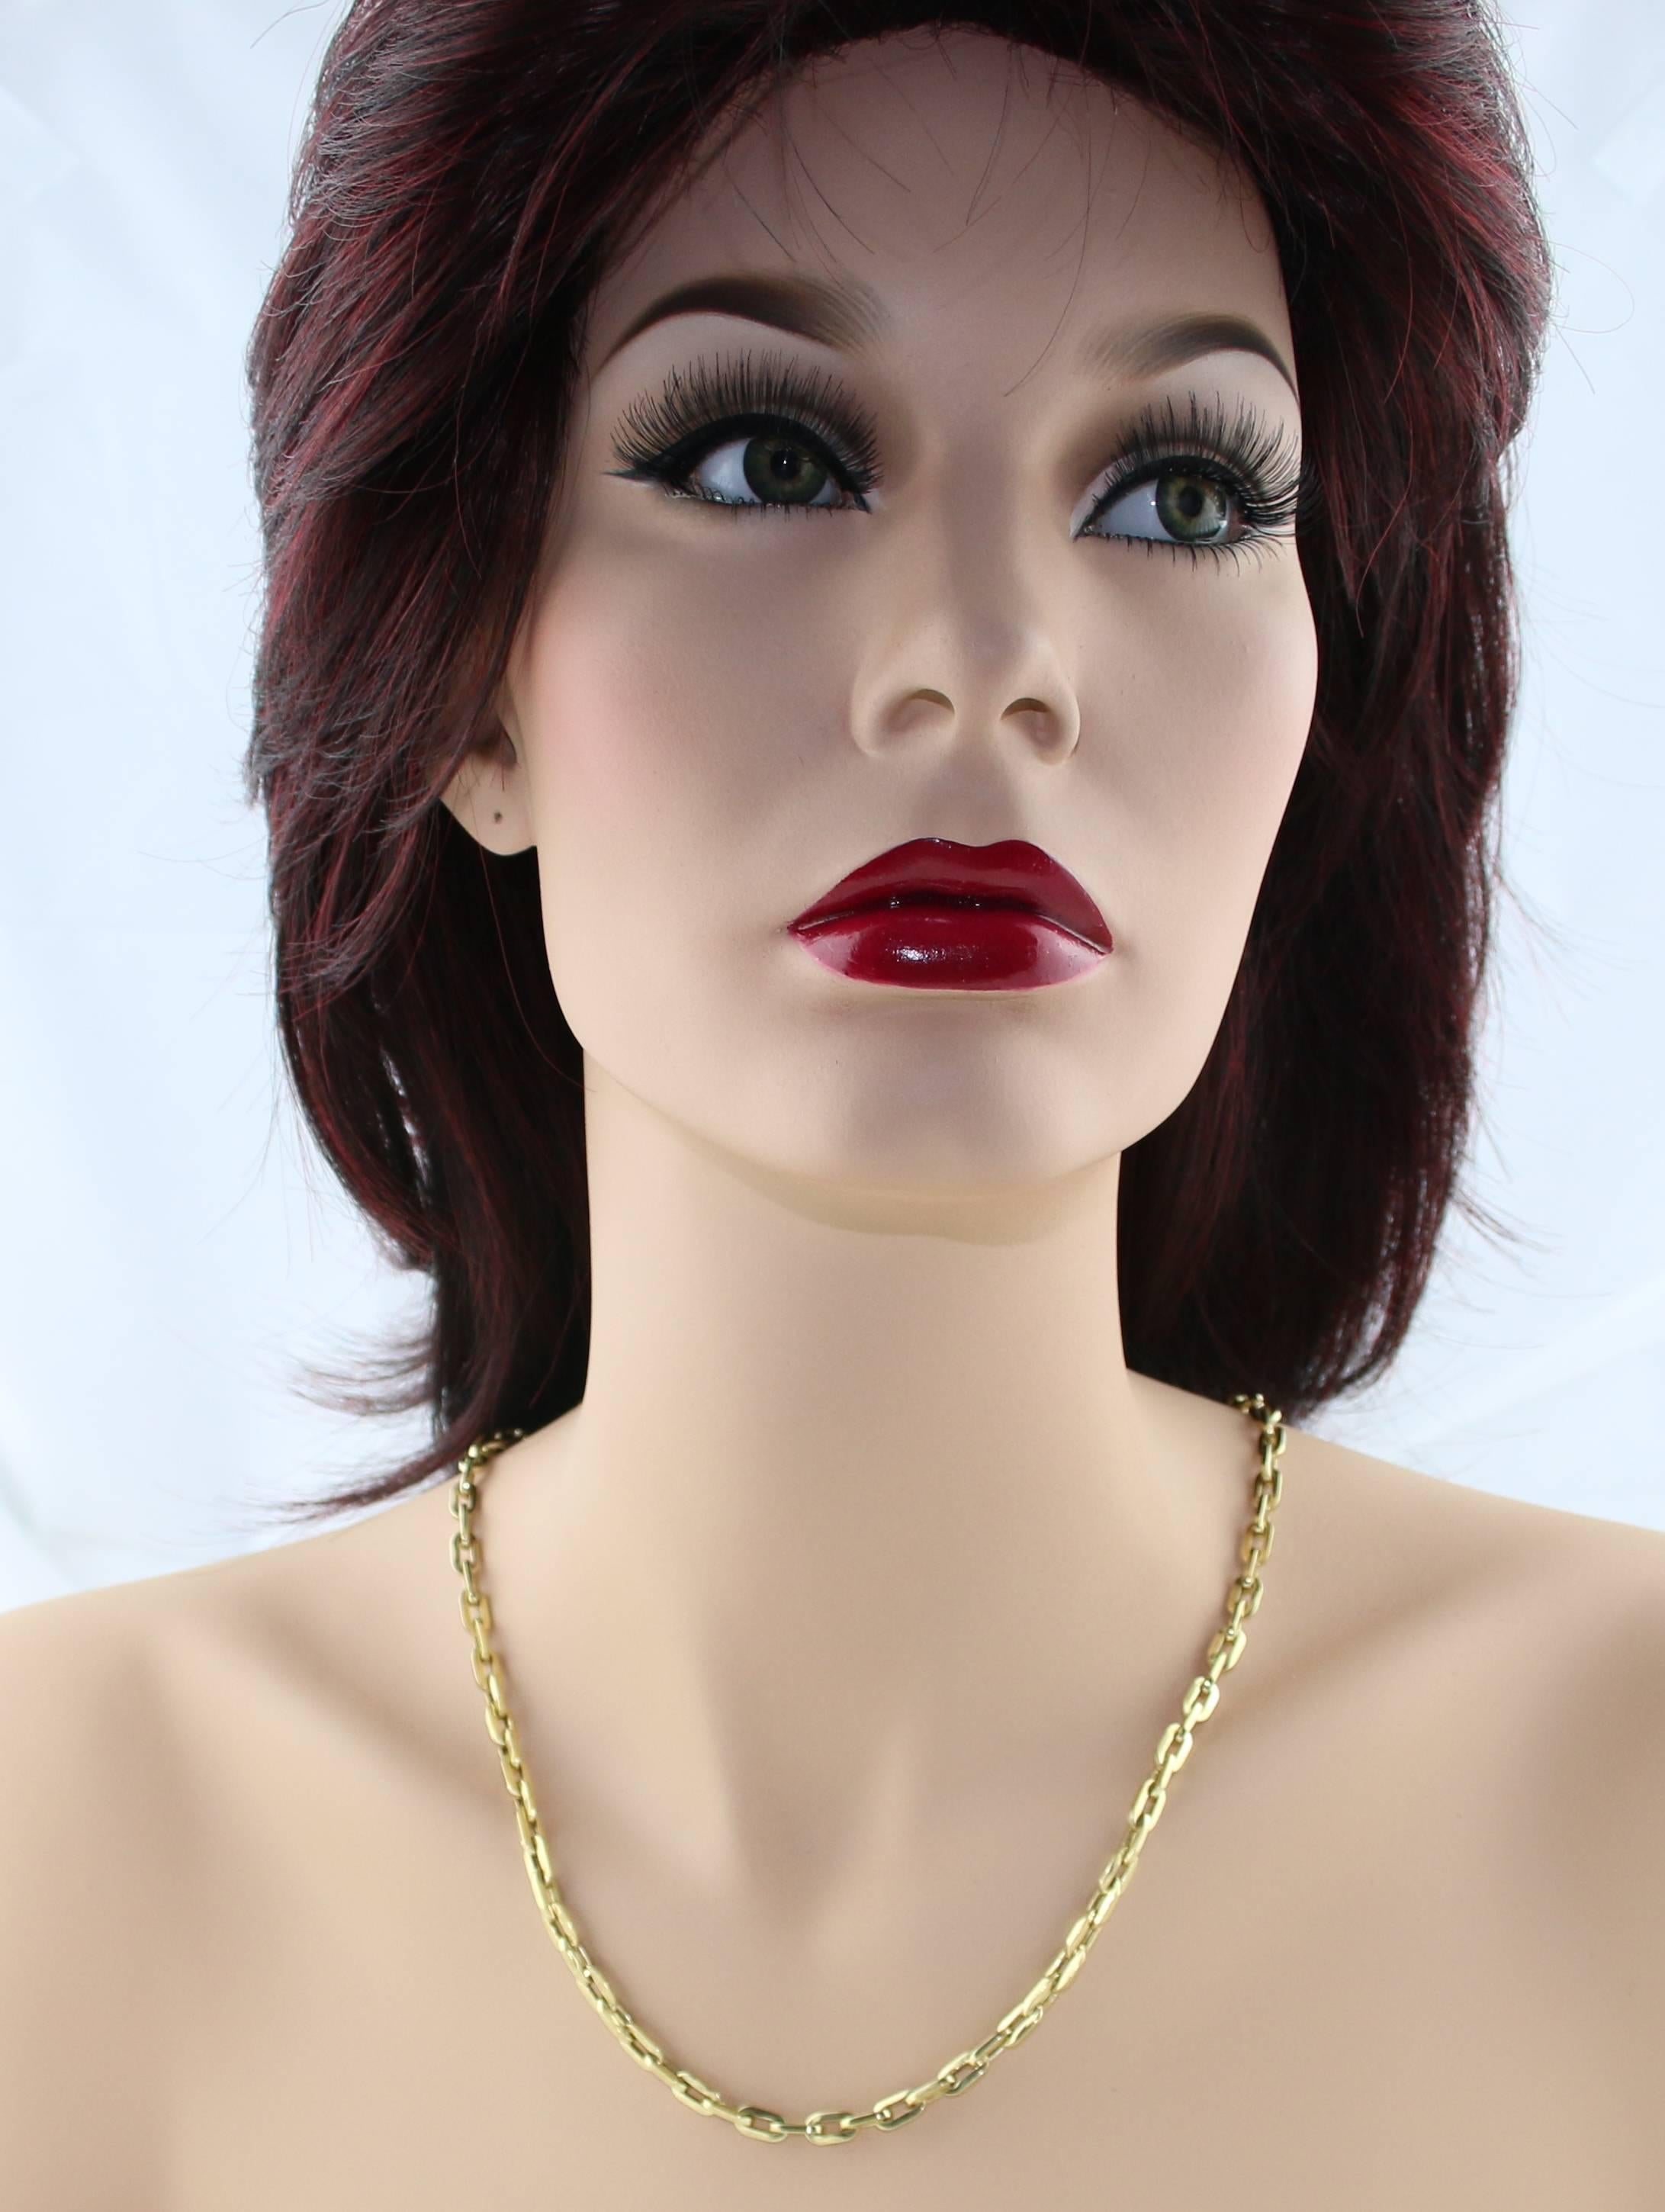 Unisex Gold Chain
The chain is 14K Yellow Gold
The chain is unisex.
The chain is made in Italy.
The chain is 24